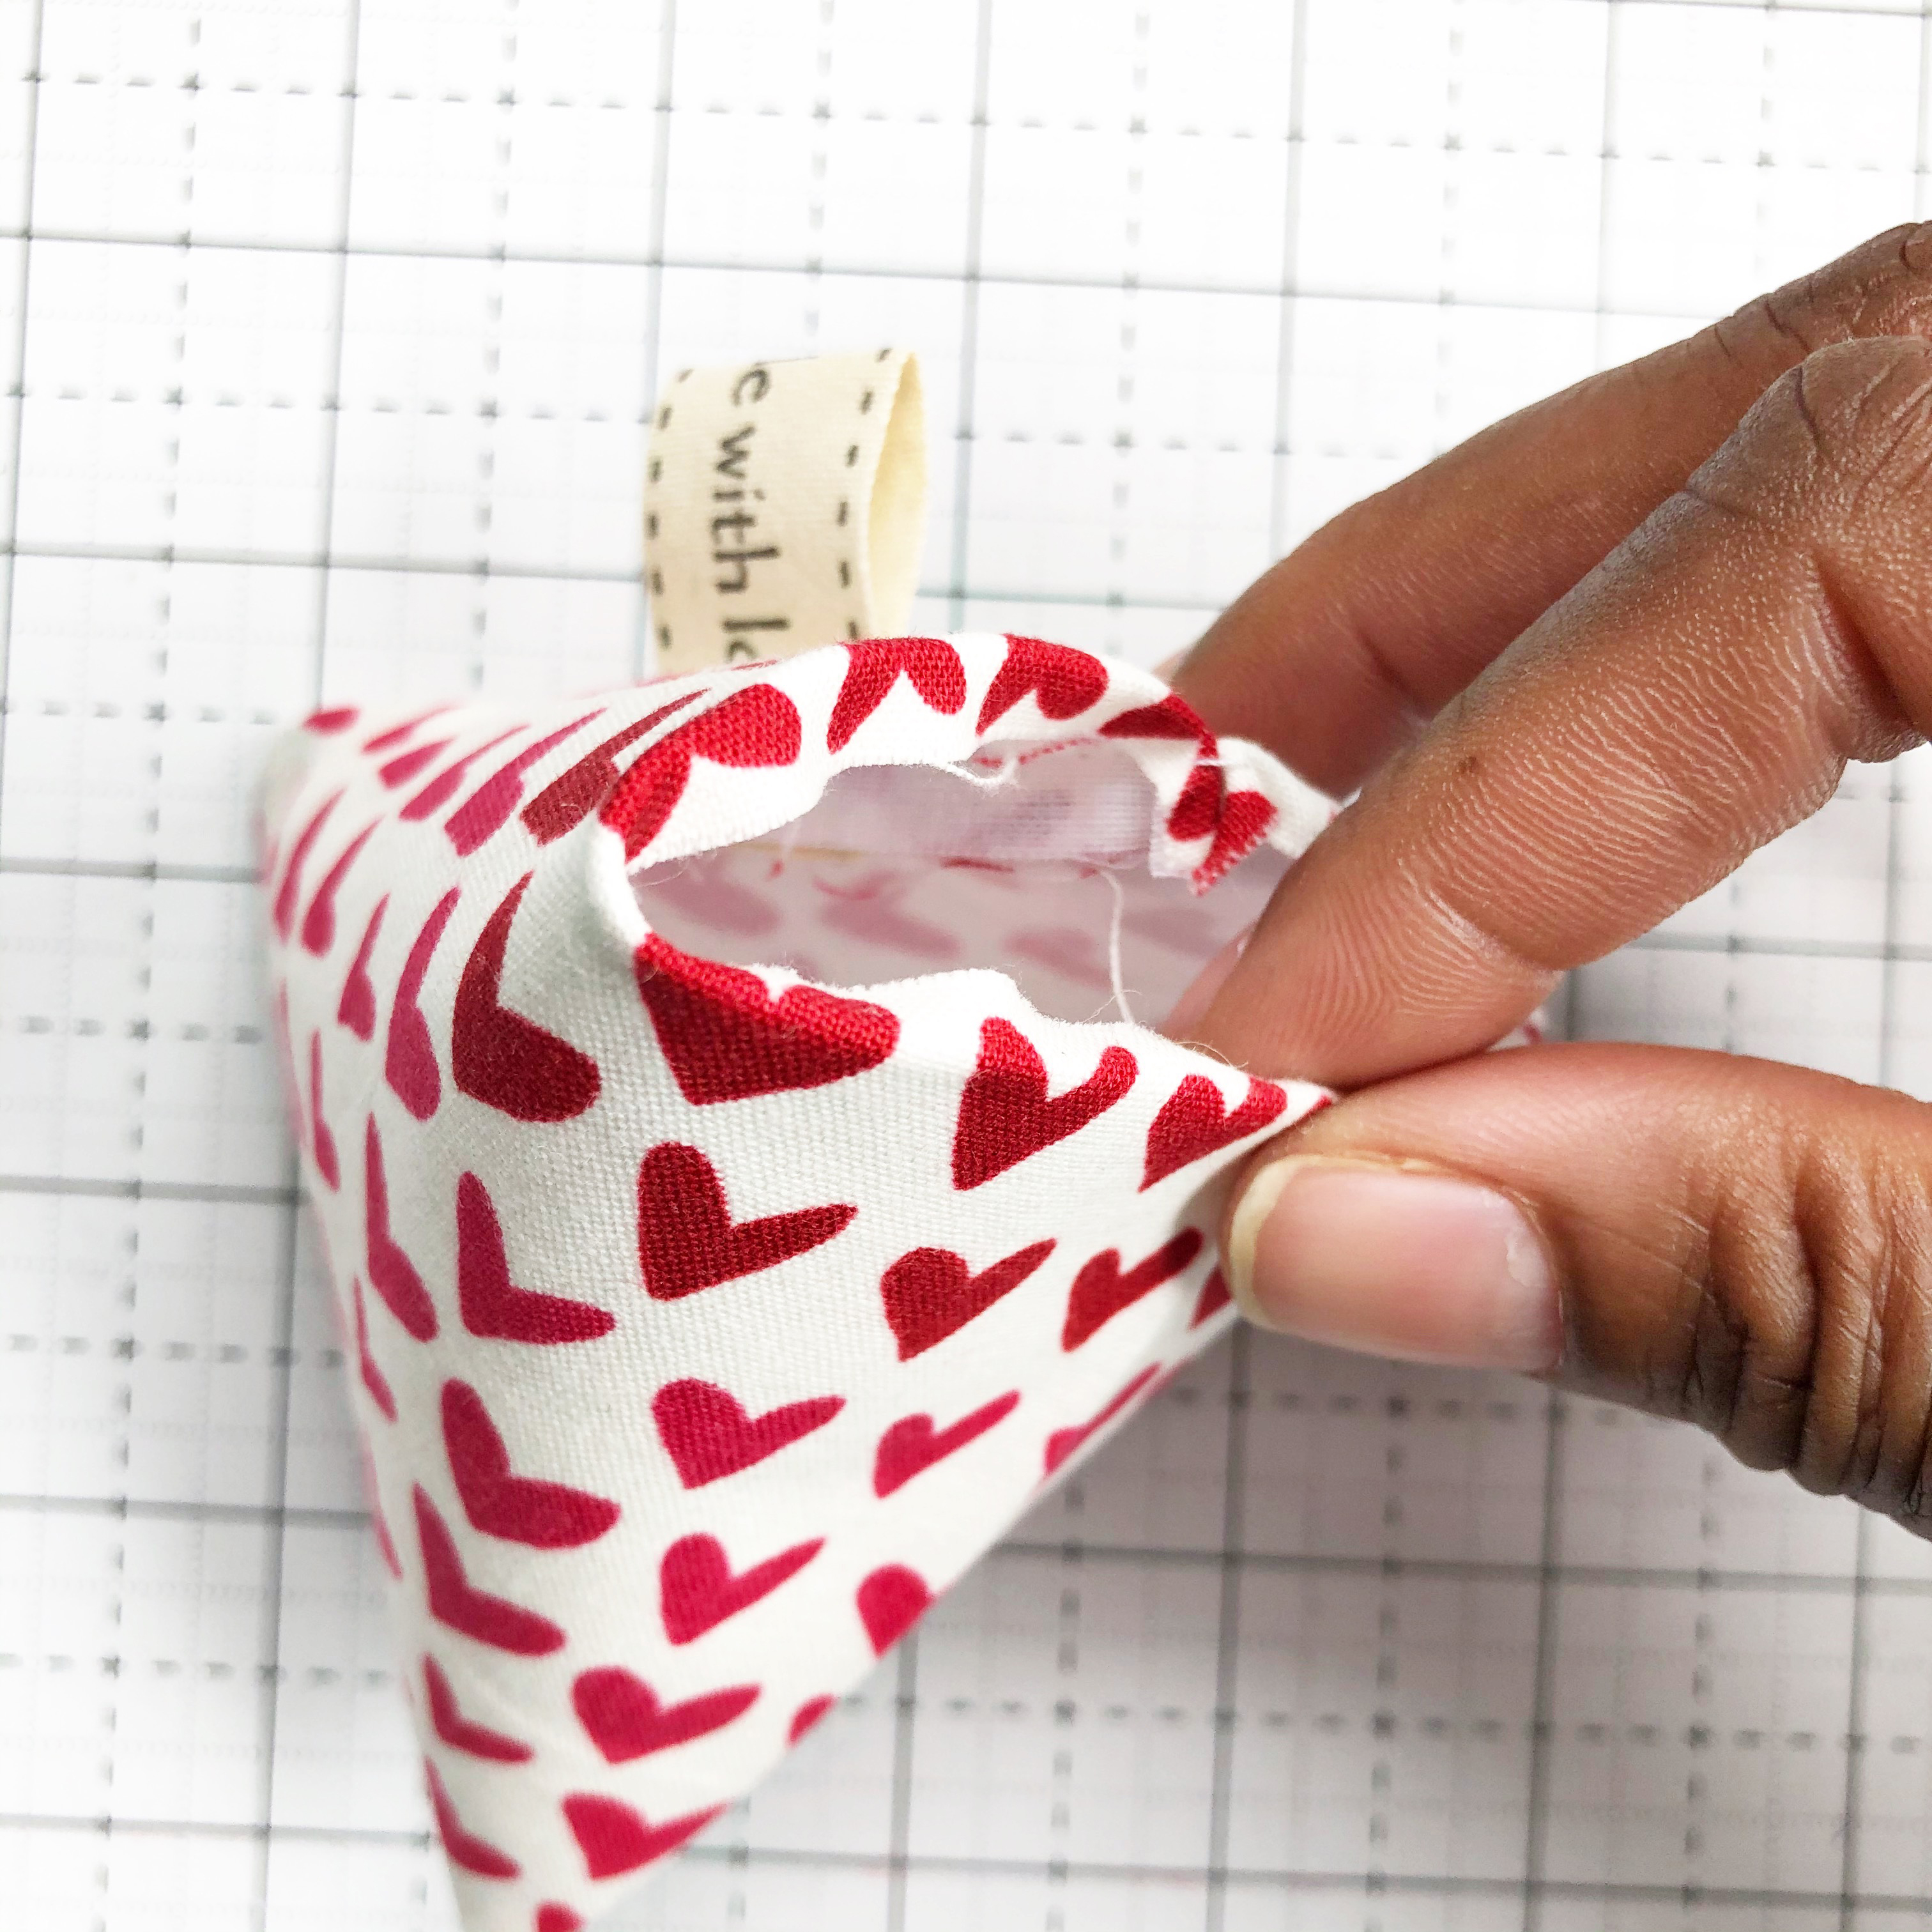 Fabric Weight Tutorial: Trim and turn the fabric